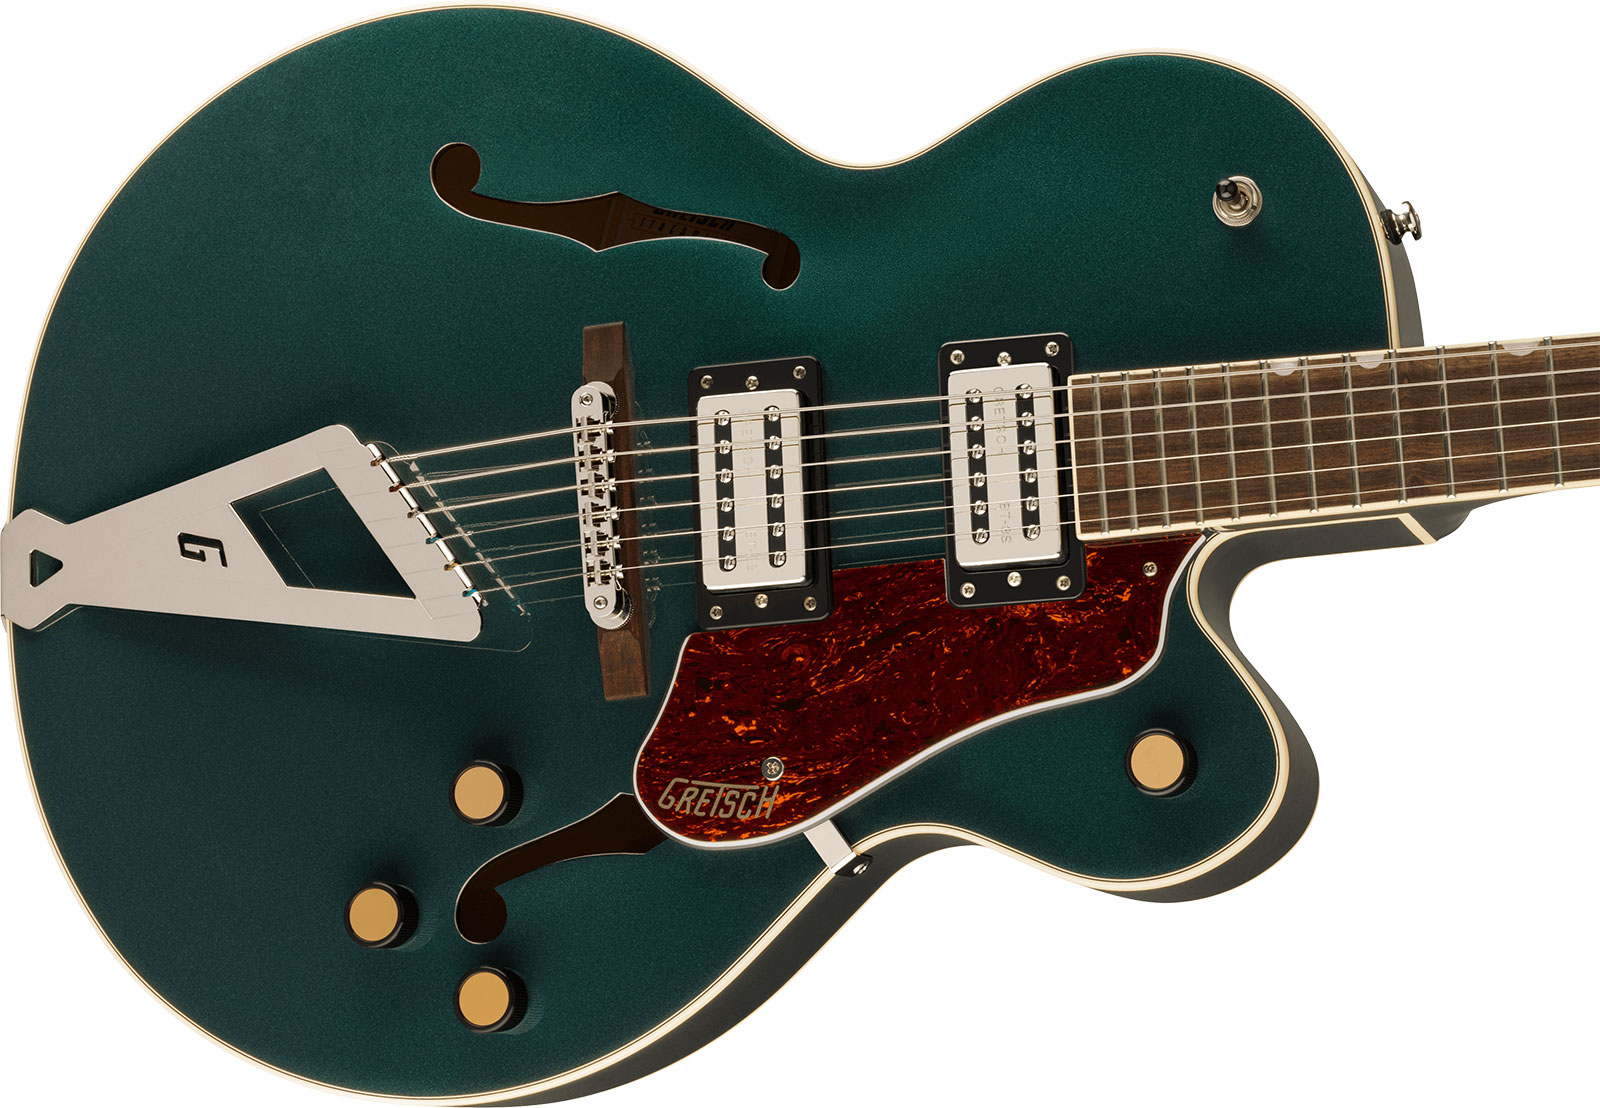 Gretsch G2420 Streamliner Hollow Body With Chromatic Ii 2h Ht Lau - Cadillac Green - Guitare Électrique 3/4 Caisse & Jazz - Variation 2